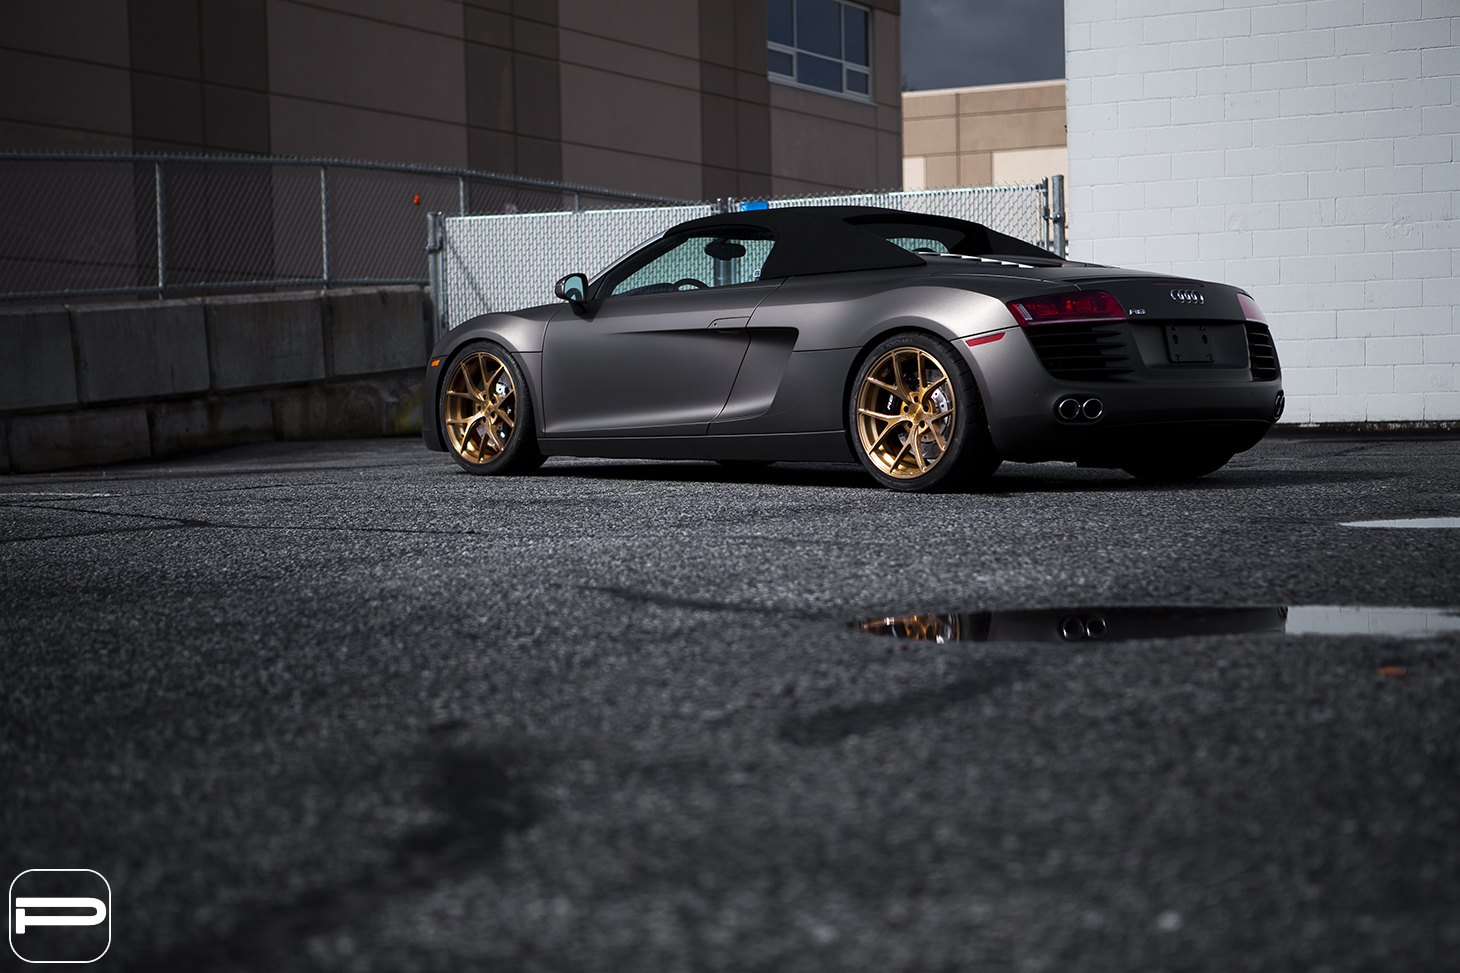 Aftermarket Rear Diffuser on Gray Matte Audi R8 - Photo by PUR Wheels